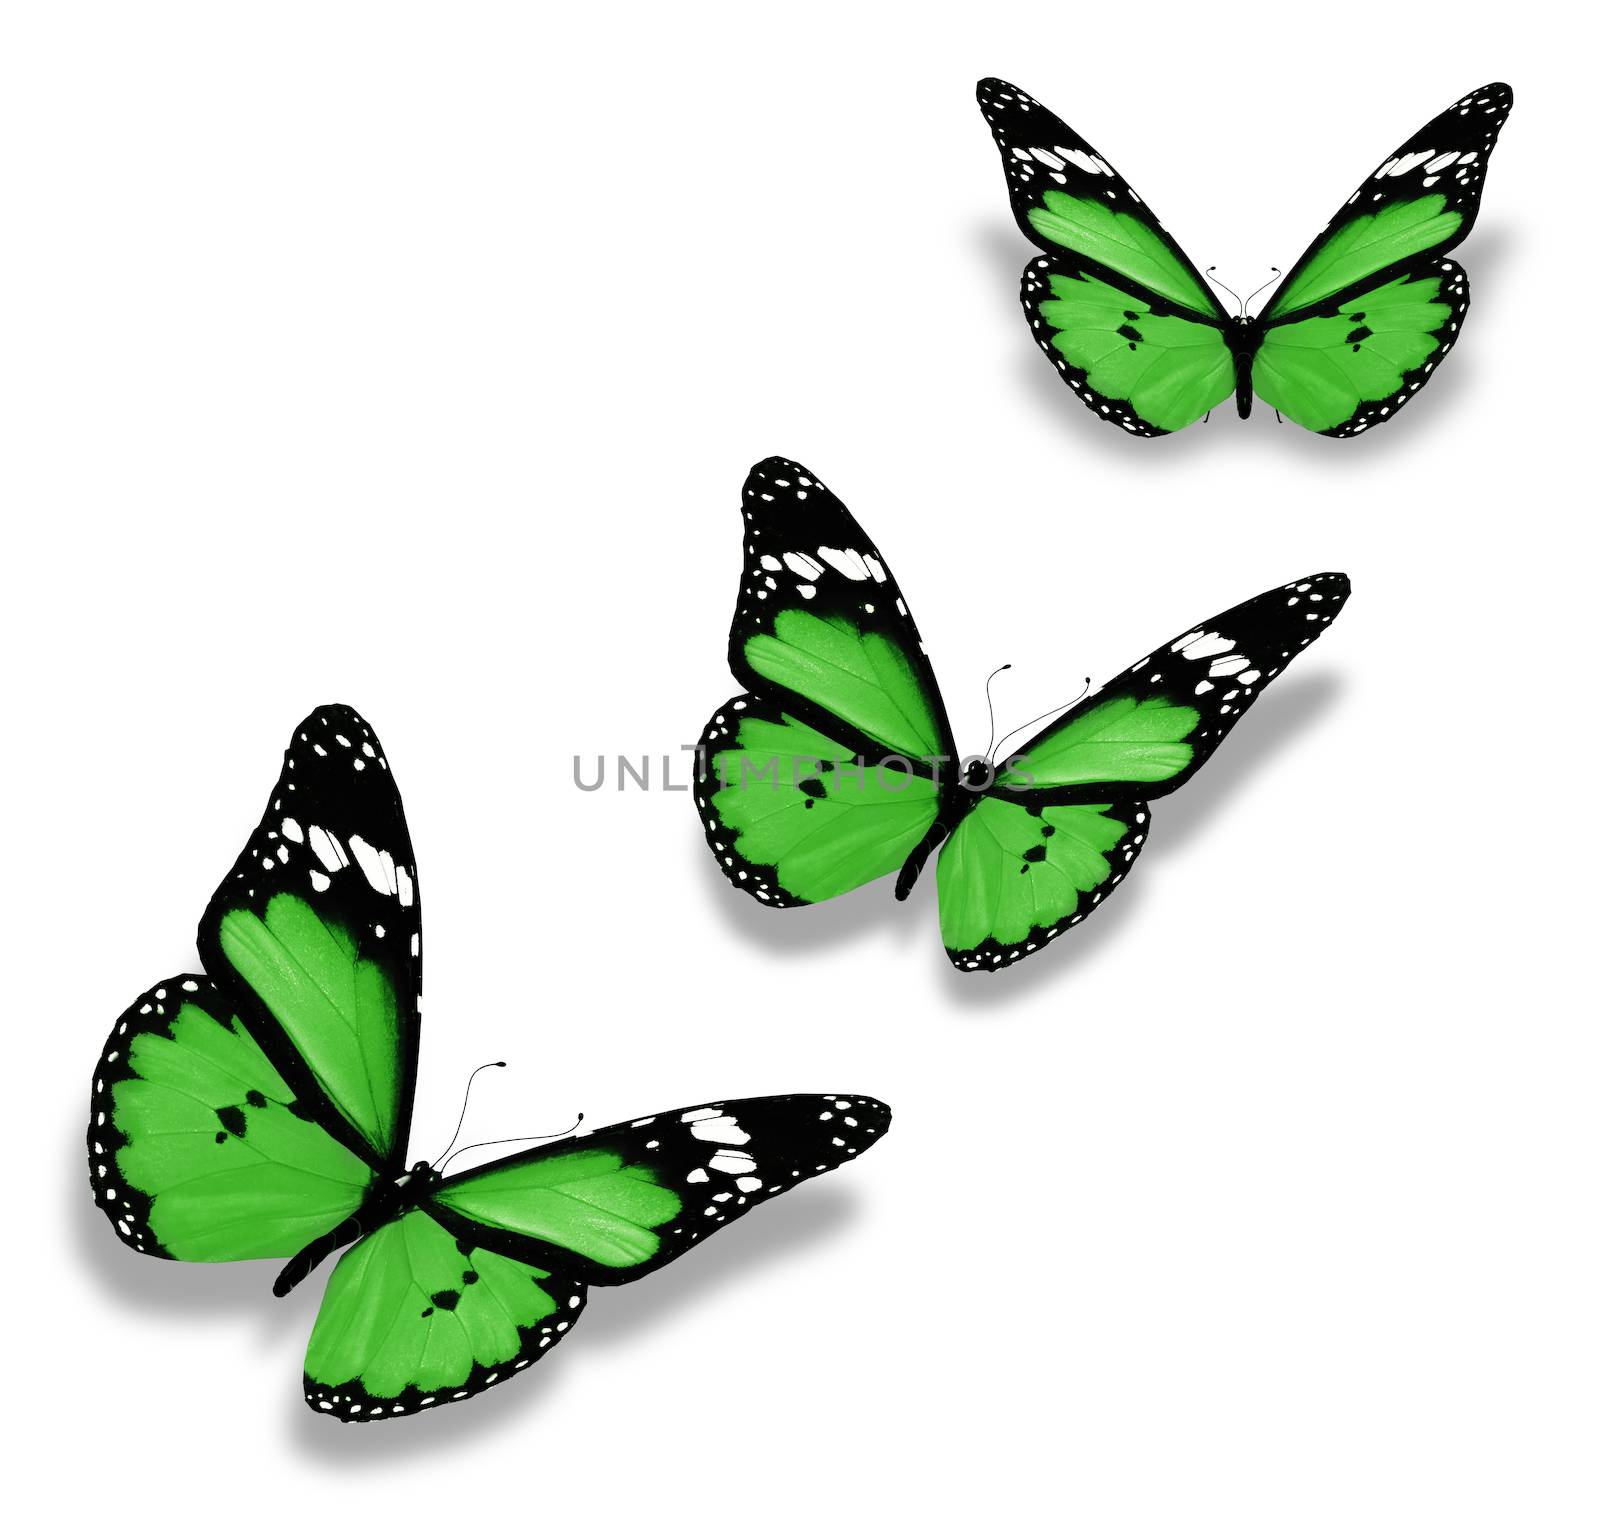 Three green butterflies, isolated on white